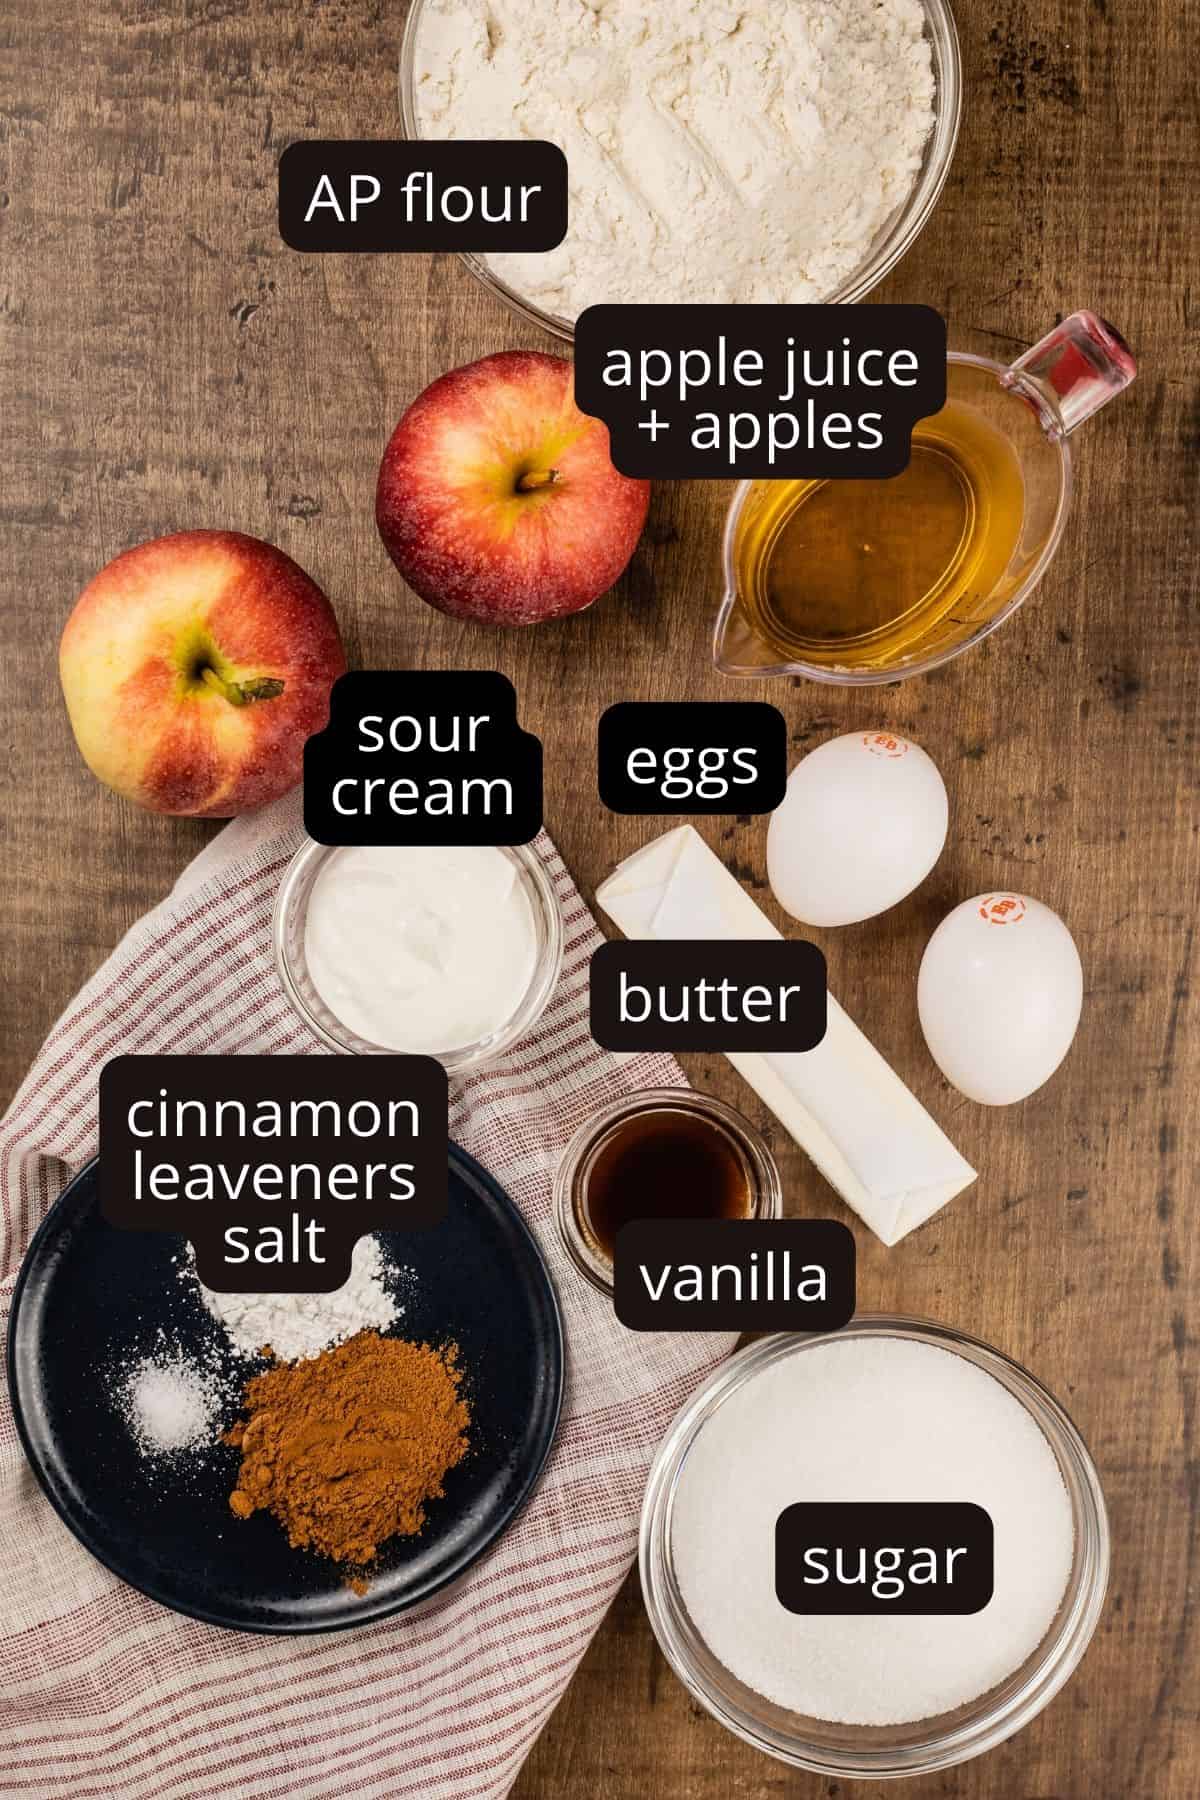 ingredients to apple cinnamon muffins in various glass bowls on the wood tabletop. black text boxes with white lettering labels each ingredient.